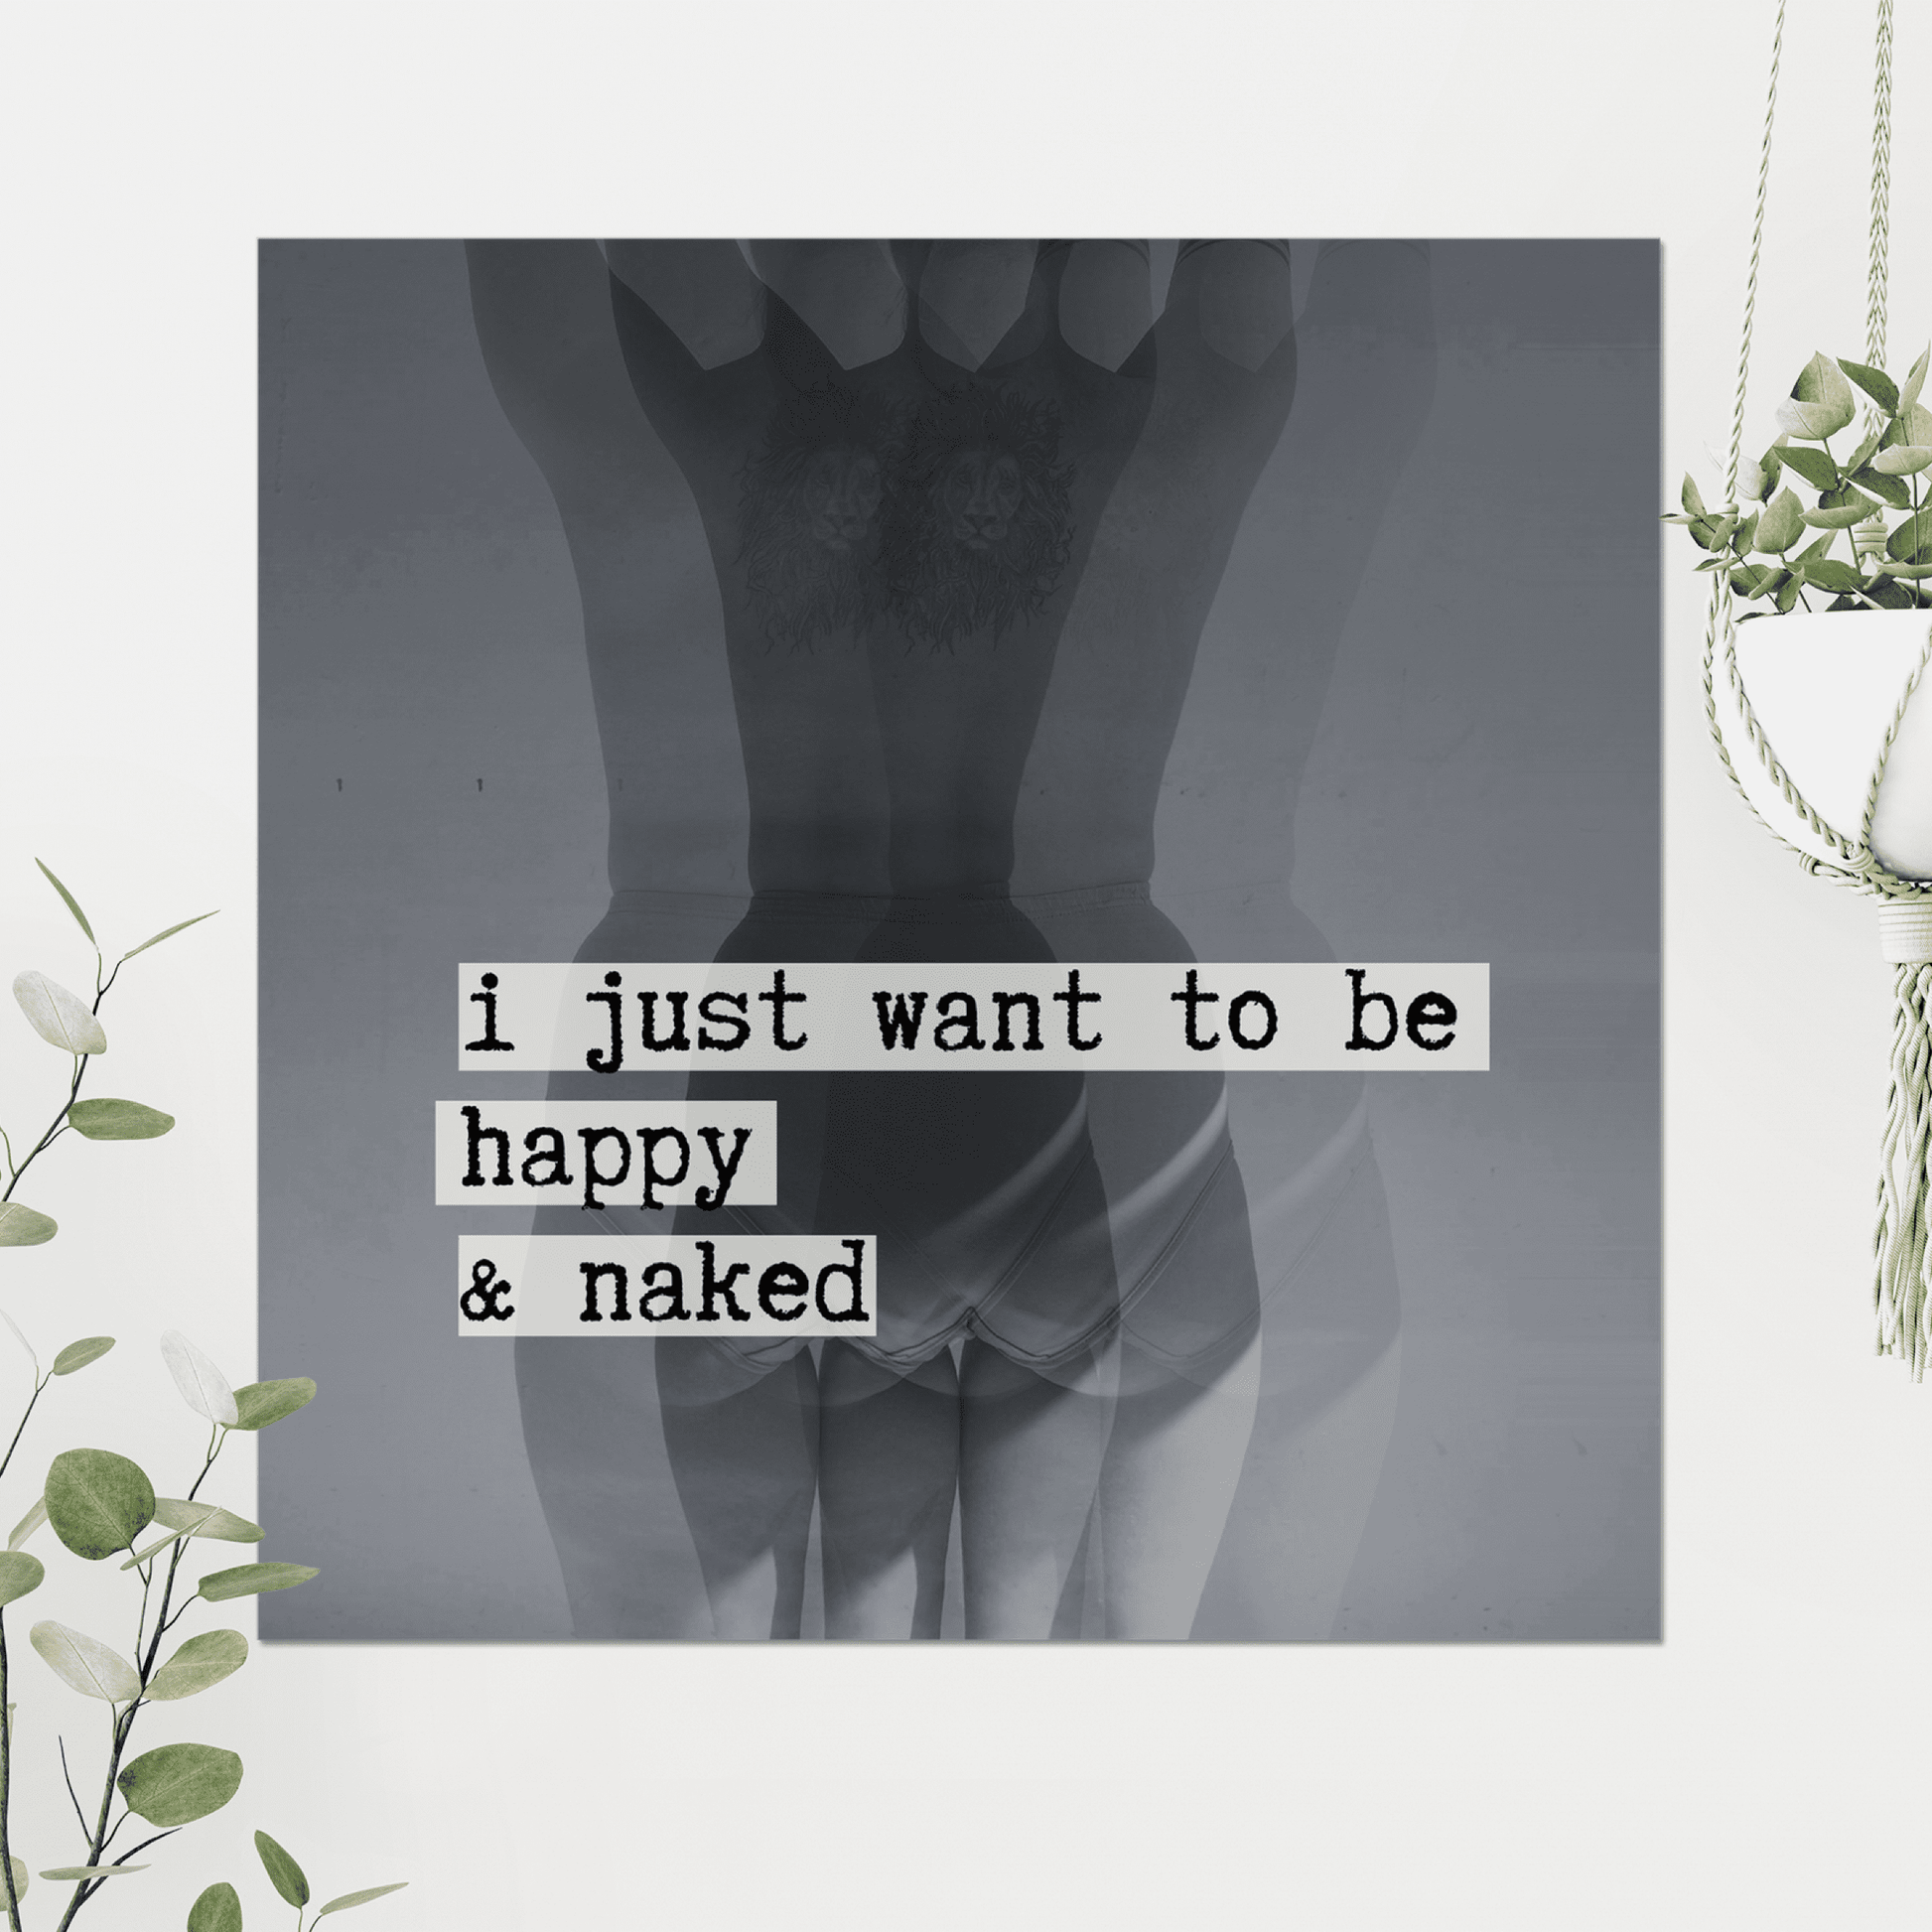 I just want to be happy and naked!  A creative black and white photography print, with a typewriter style typography overlay - making a clear statement for body positivity and acceptance.